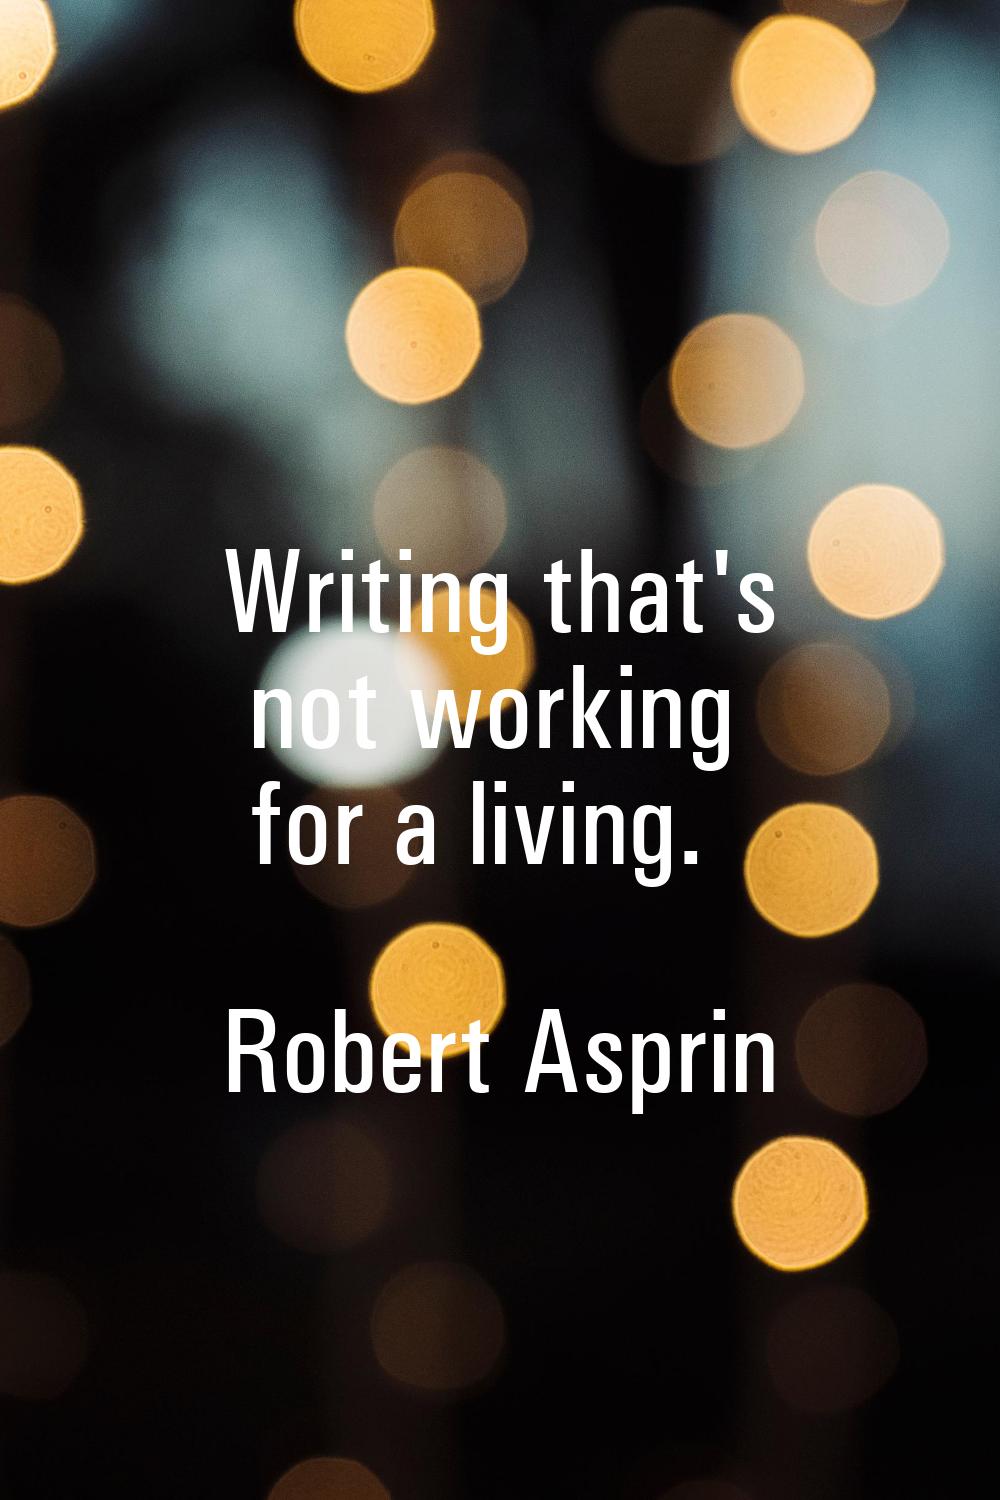 Writing that's not working for a living.